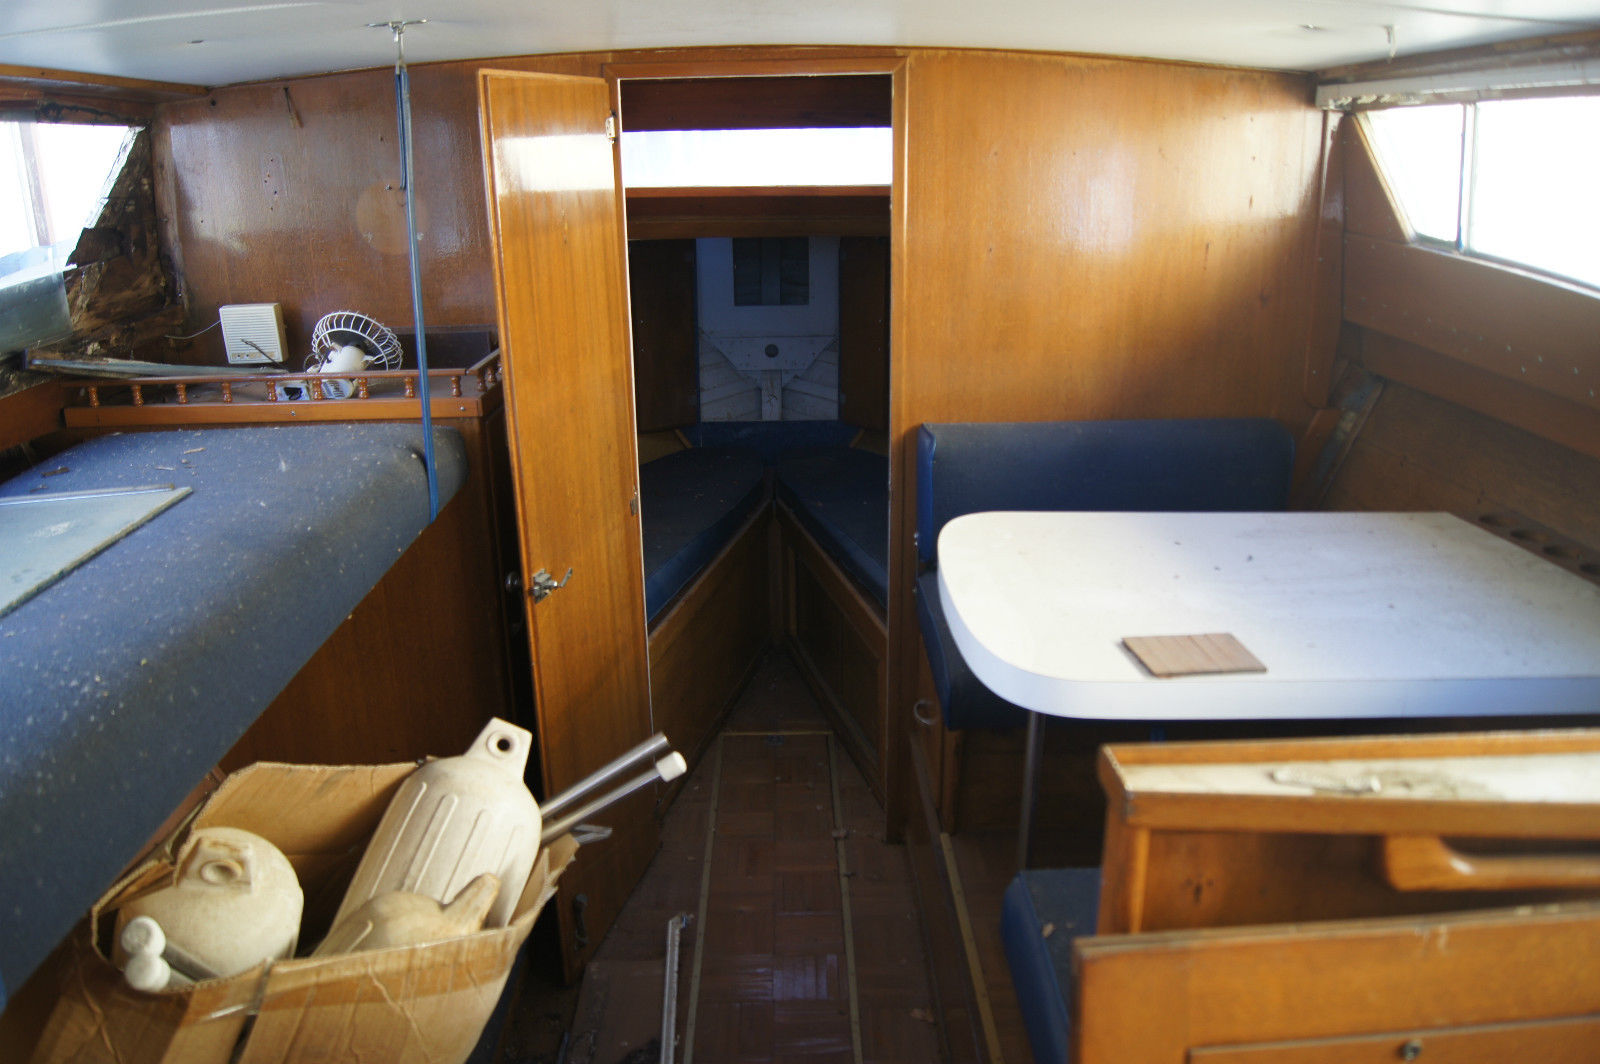 Chris Craft Constellation 1962 for sale for $1,500 - Boats ...